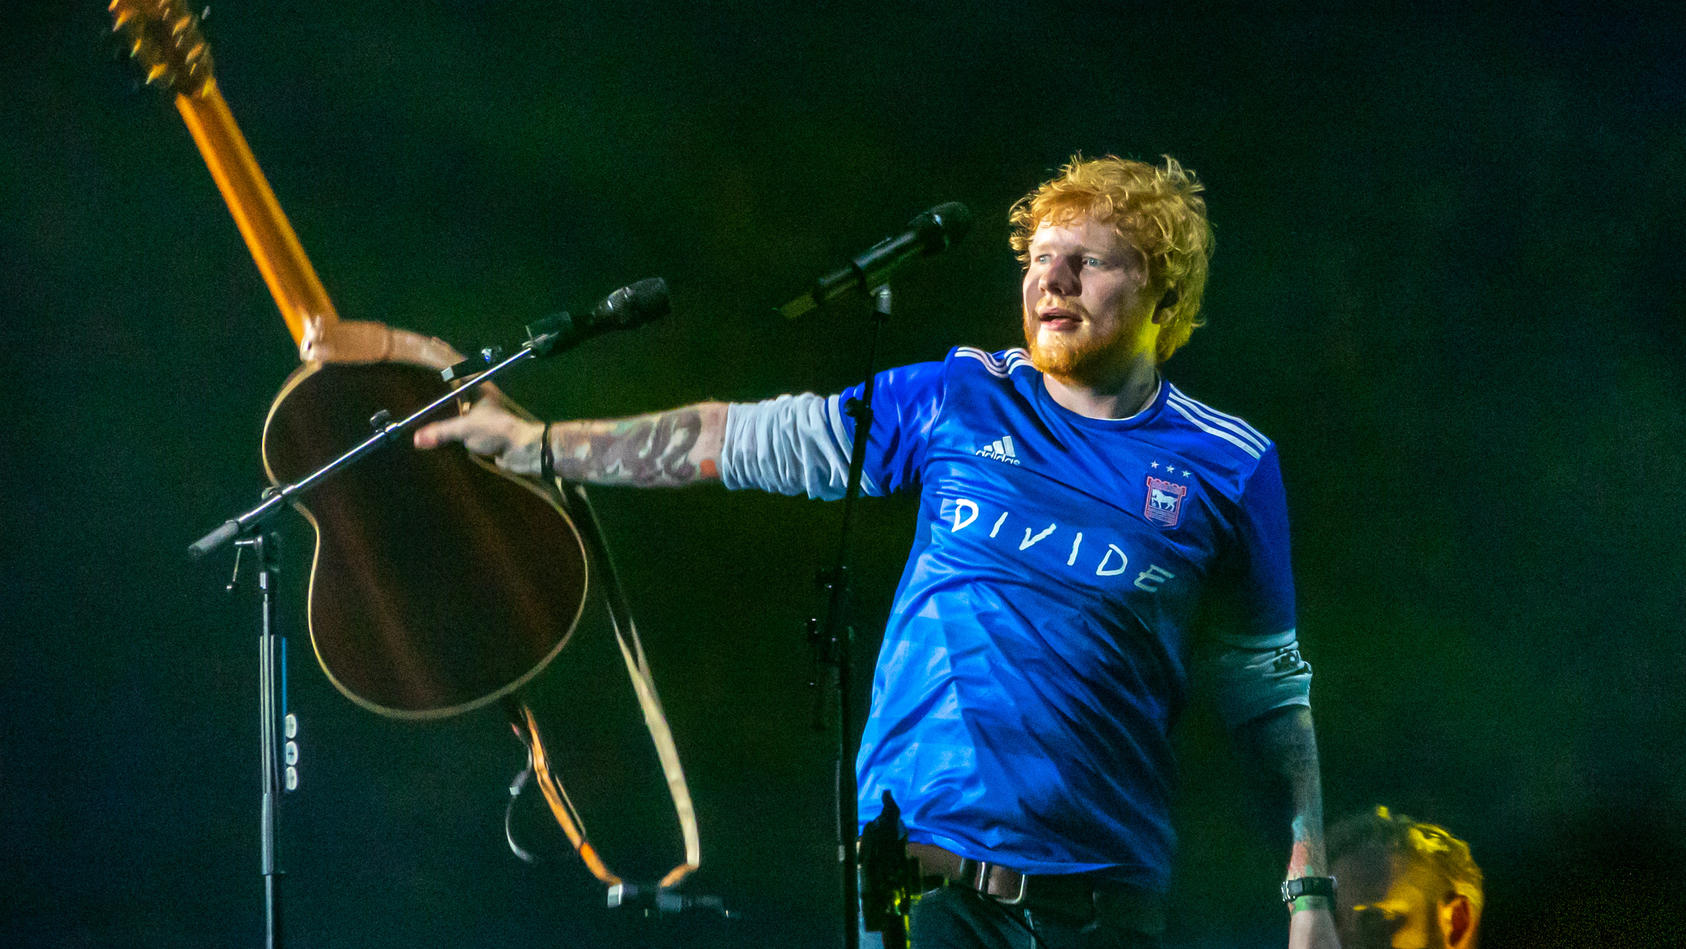 Picture dated August 23rd shows Ed Sheeran wearing an Ipswich Town football shirt on Friday night as he plays the first of four nights at Chantry Park in his home town of Ipswich as he finishes  his record breaking three year Divide tour.Ed Sheeran k